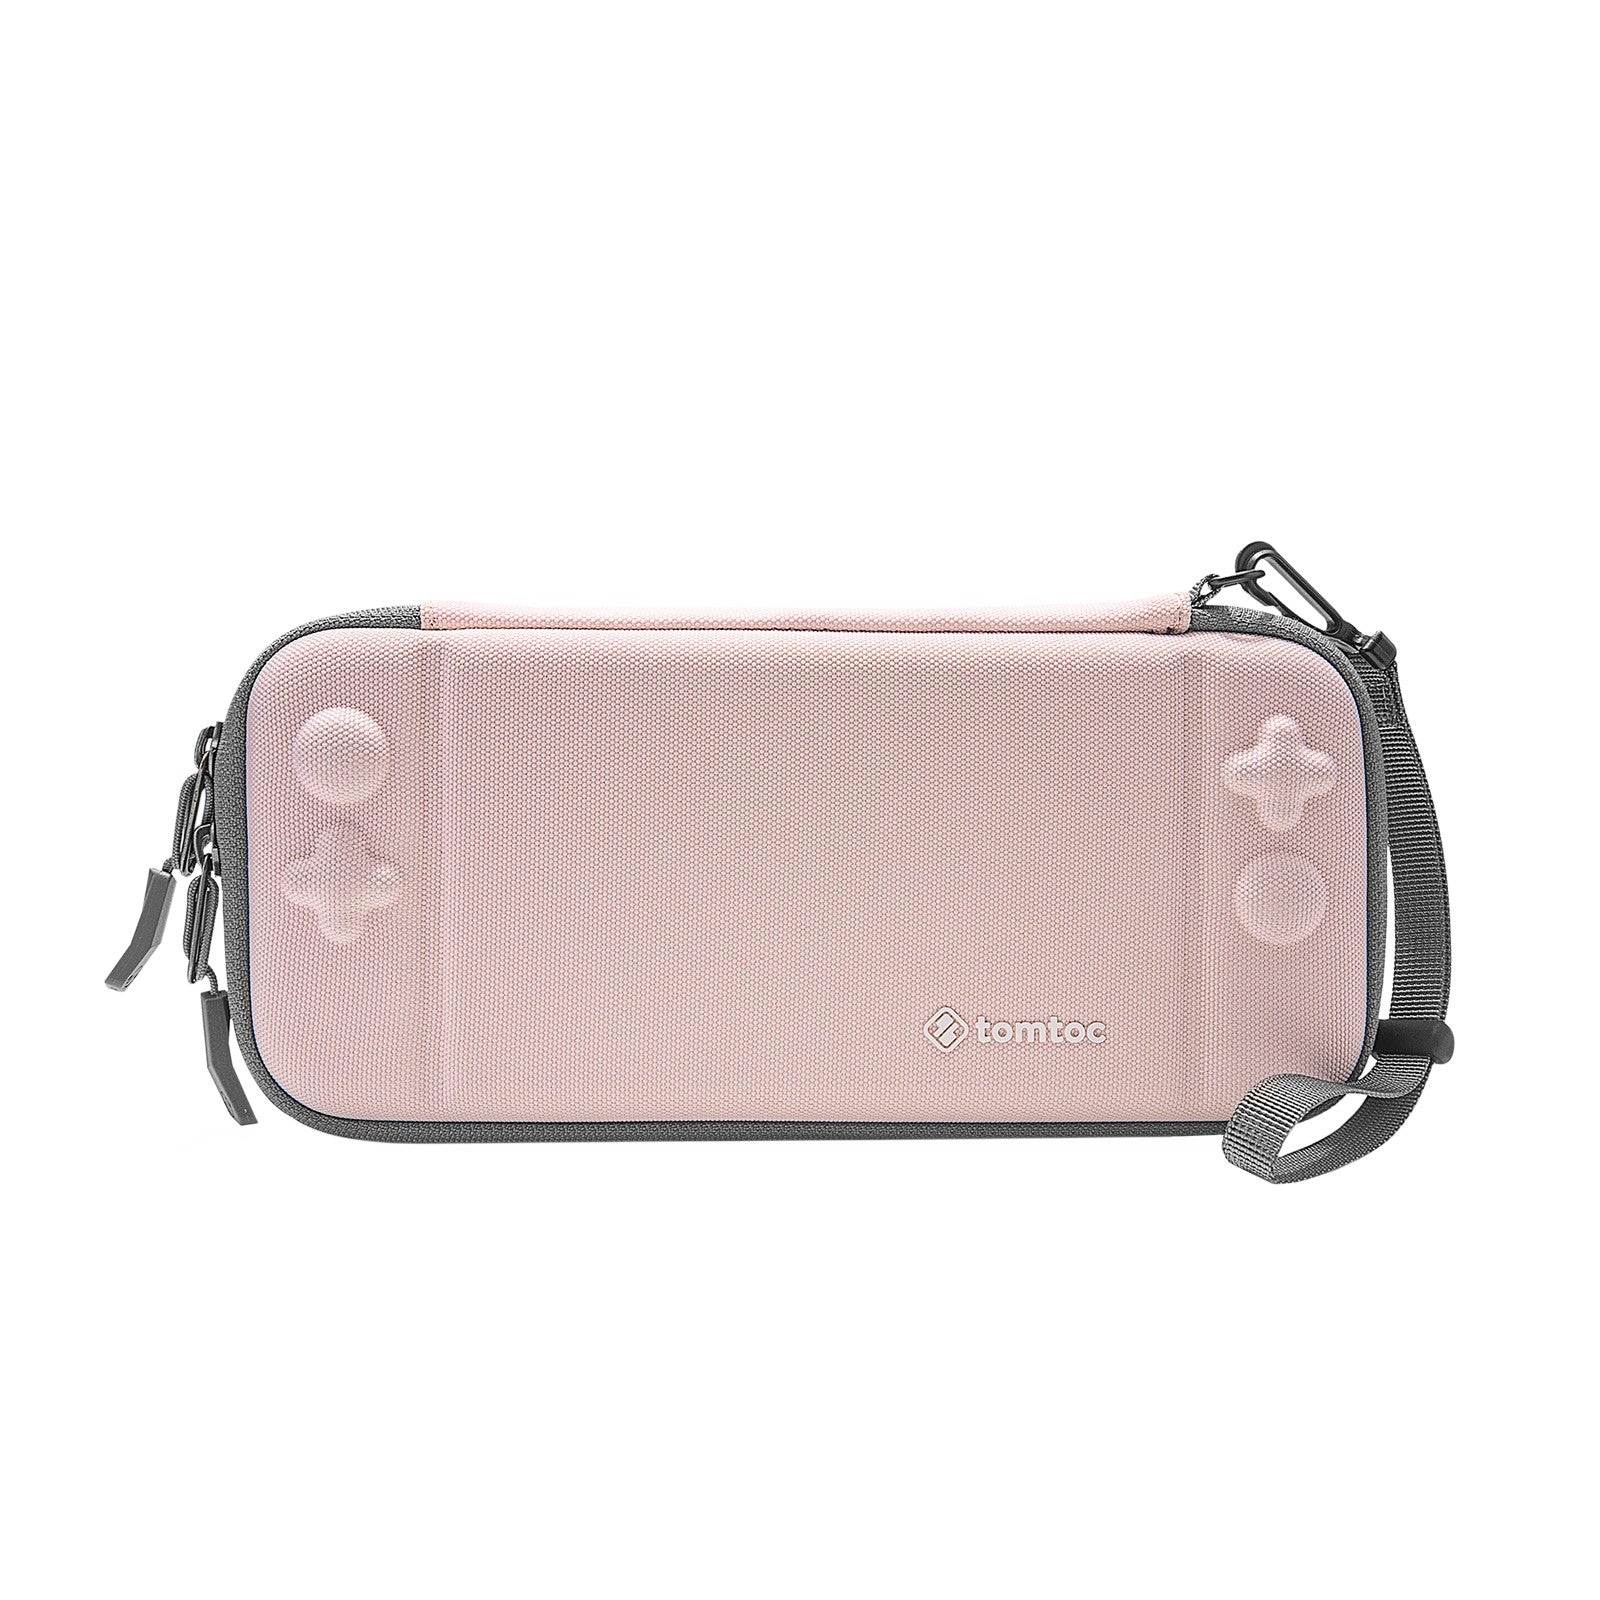 tomtoc Slim Case for Nintendo Switch | Pink